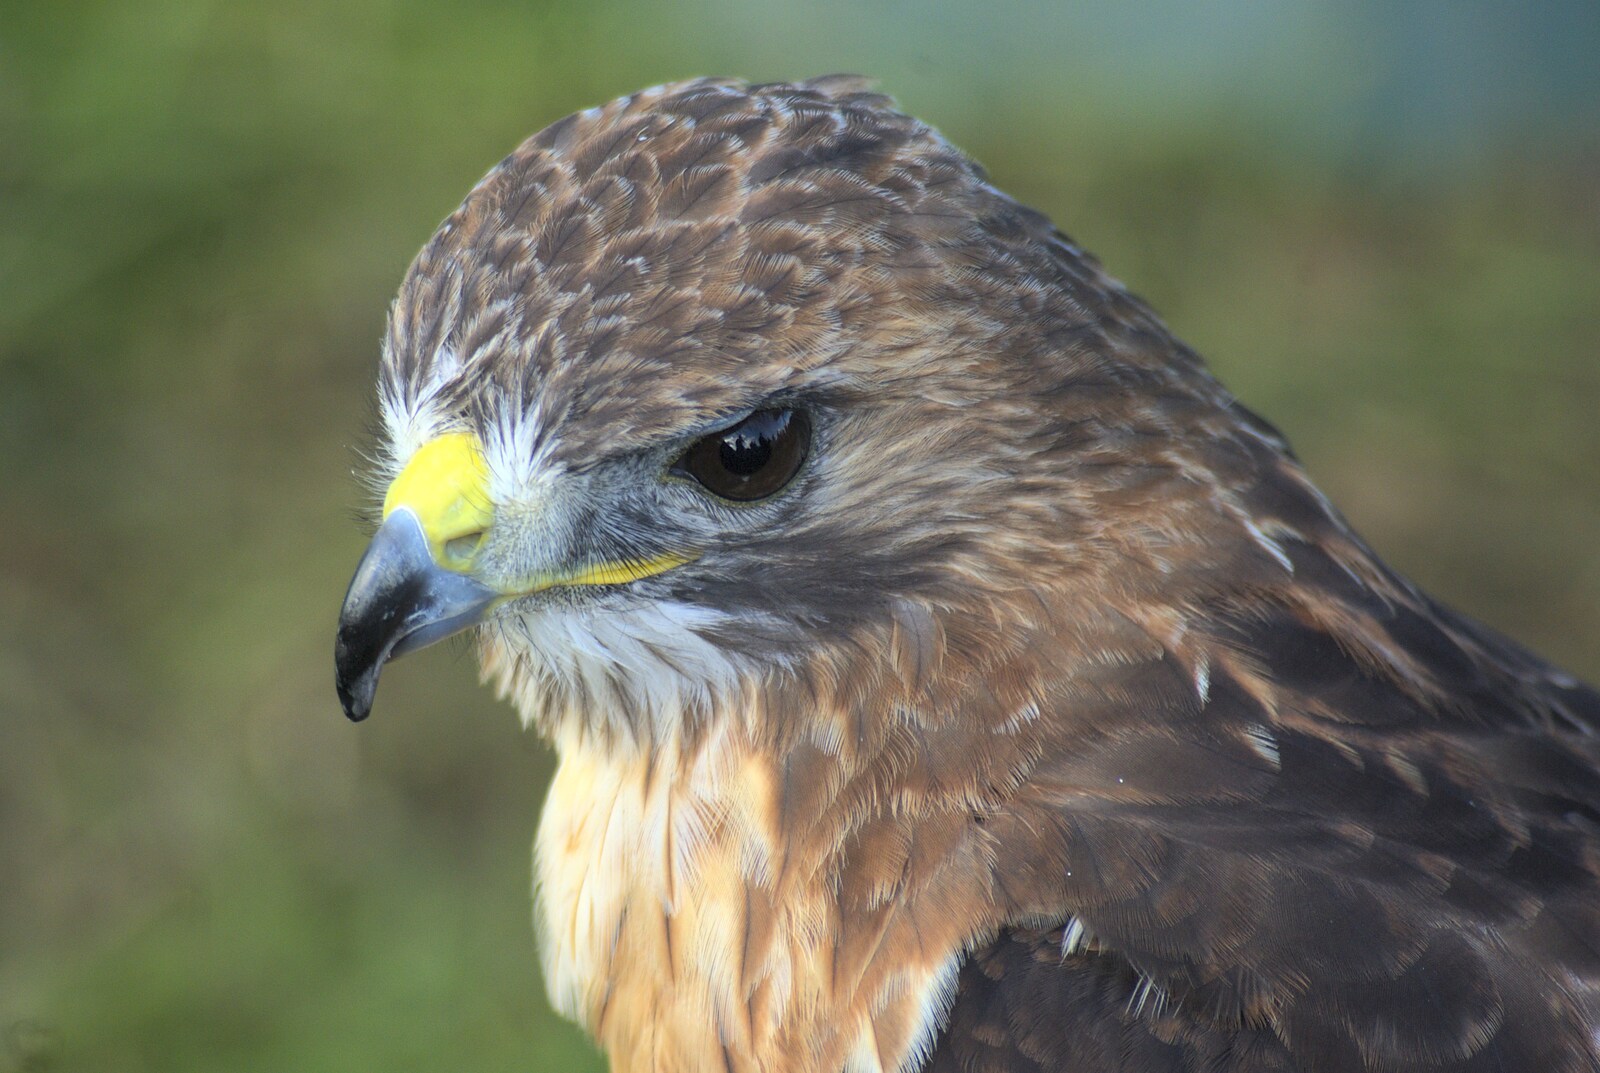 A close-up hawk from The Eye Show, Palgrave, Suffolk - 30th August 2010